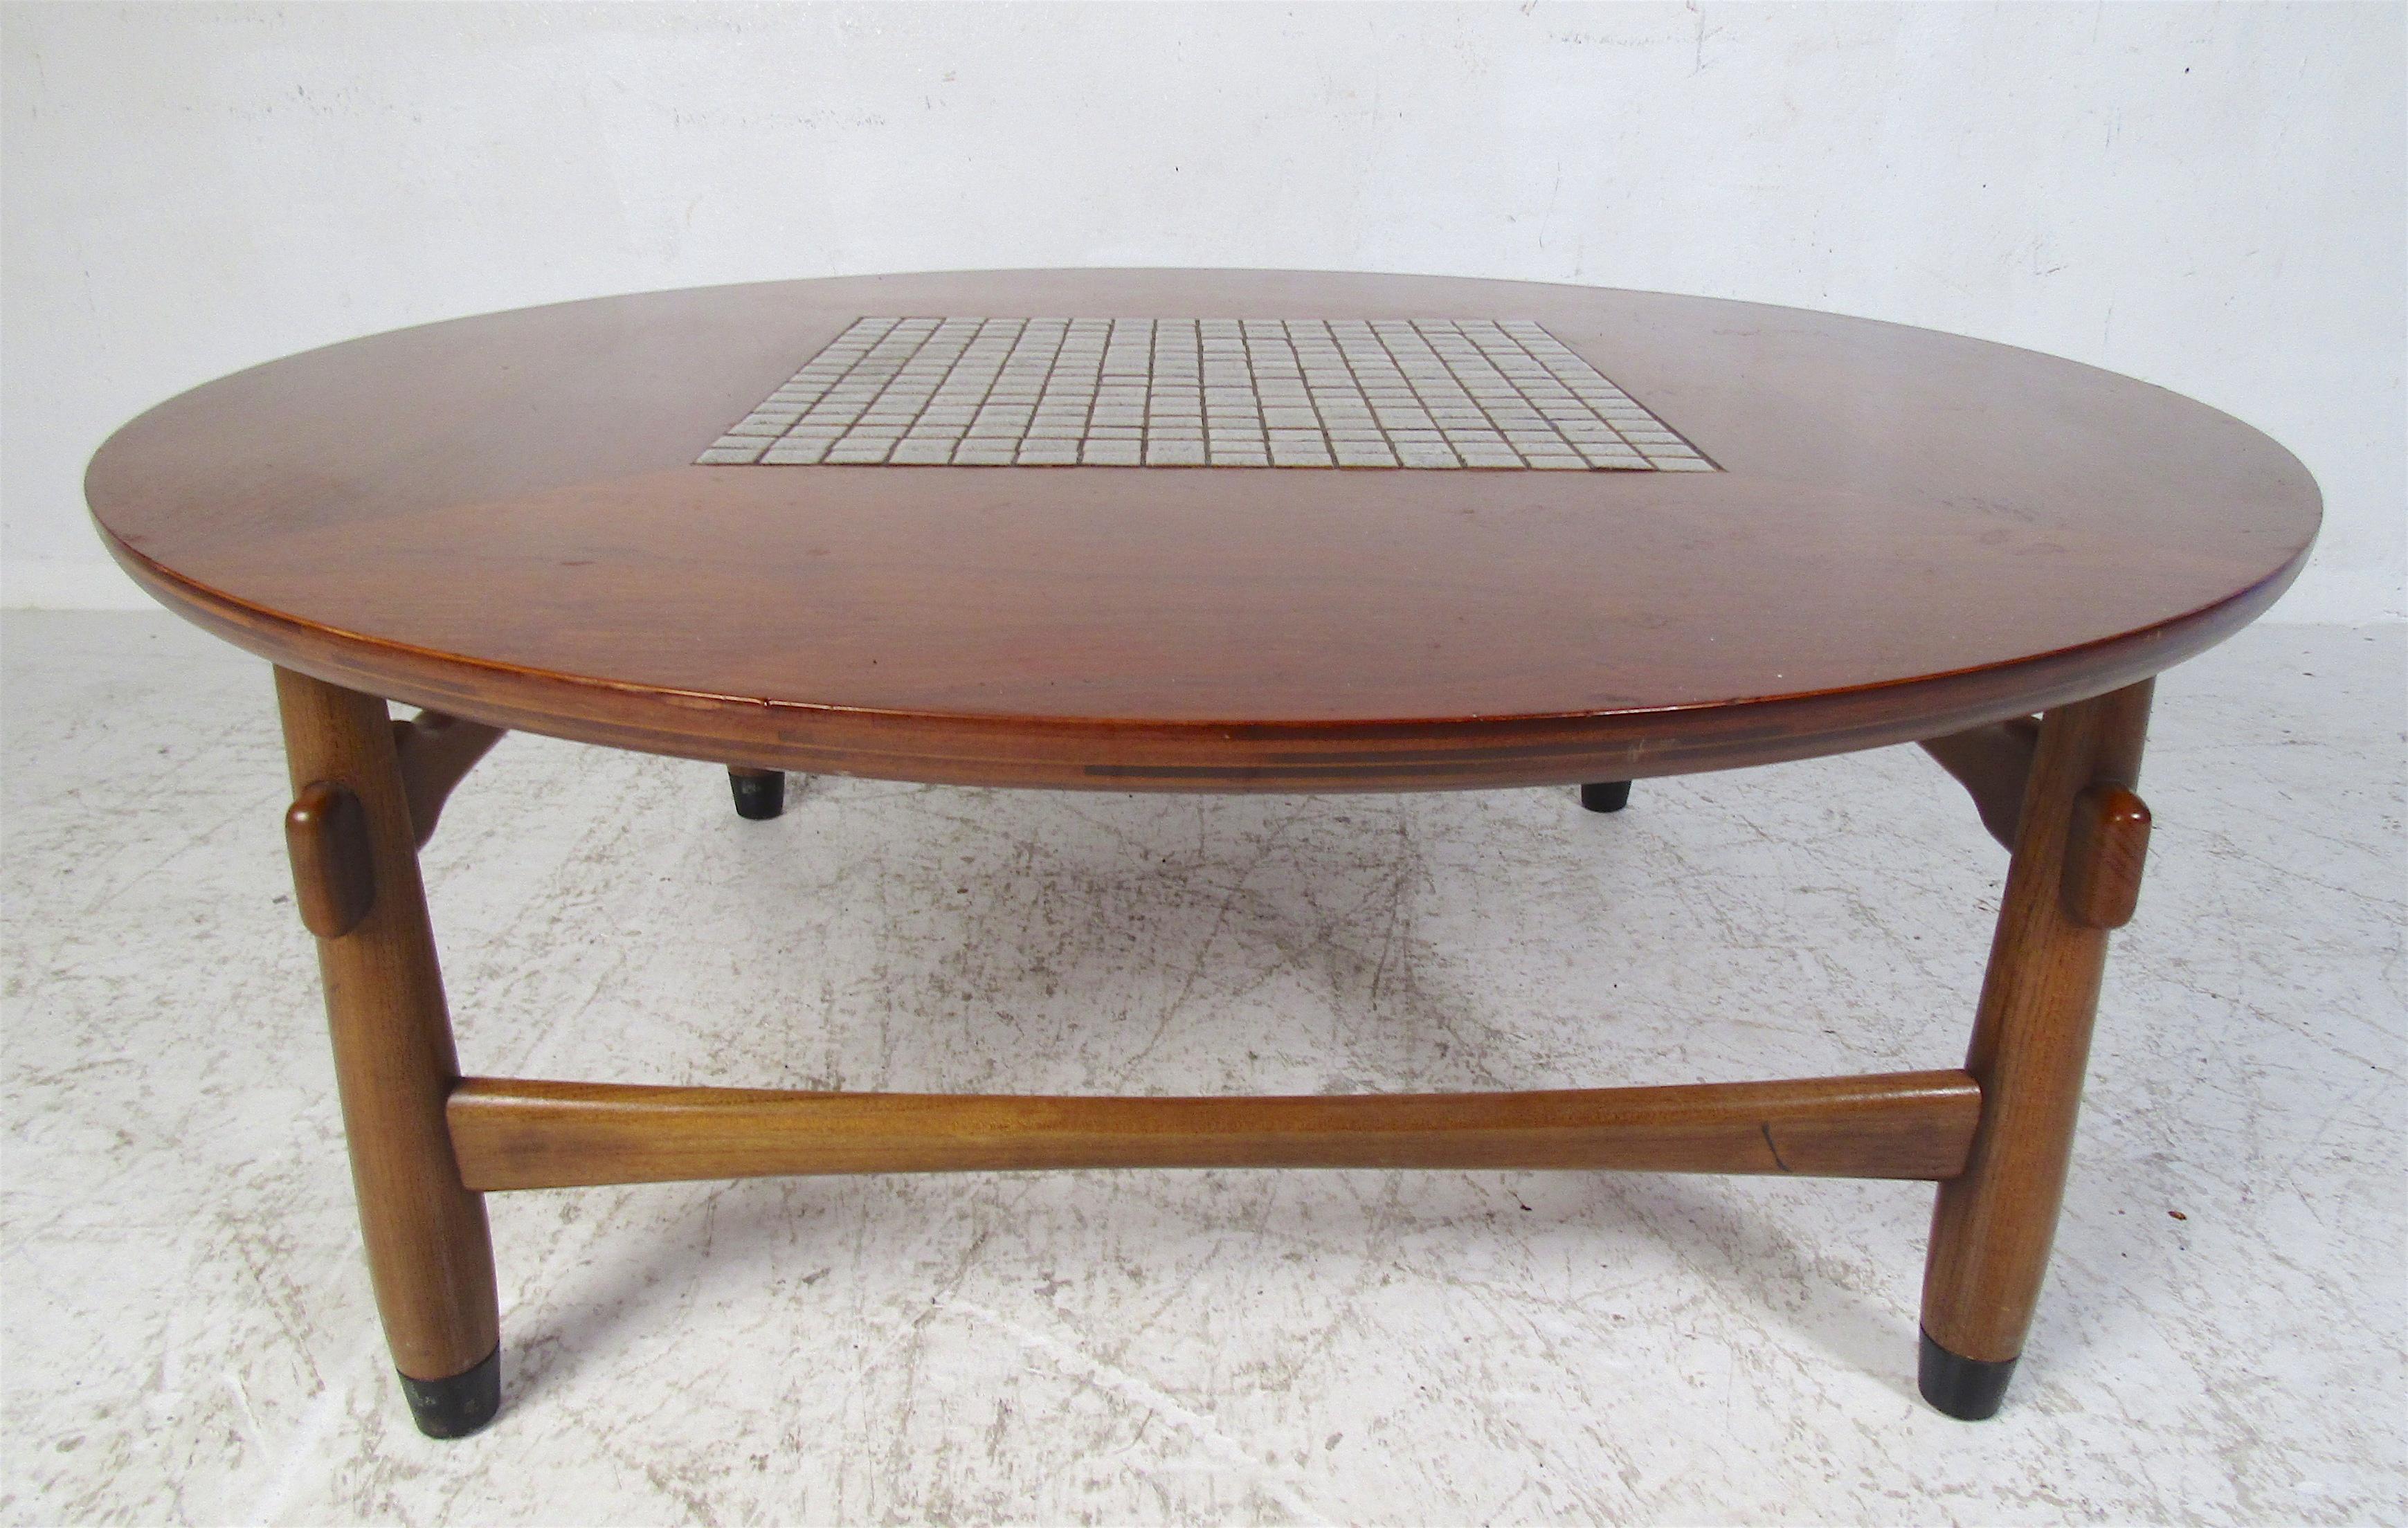 This stunning vintage modern coffee table by Lane features a unique tiled center and a walnut frame. This circular coffee table has four legs connected by sculpted stretchers. A sleek design that looks great in any modern interior. Please confirm